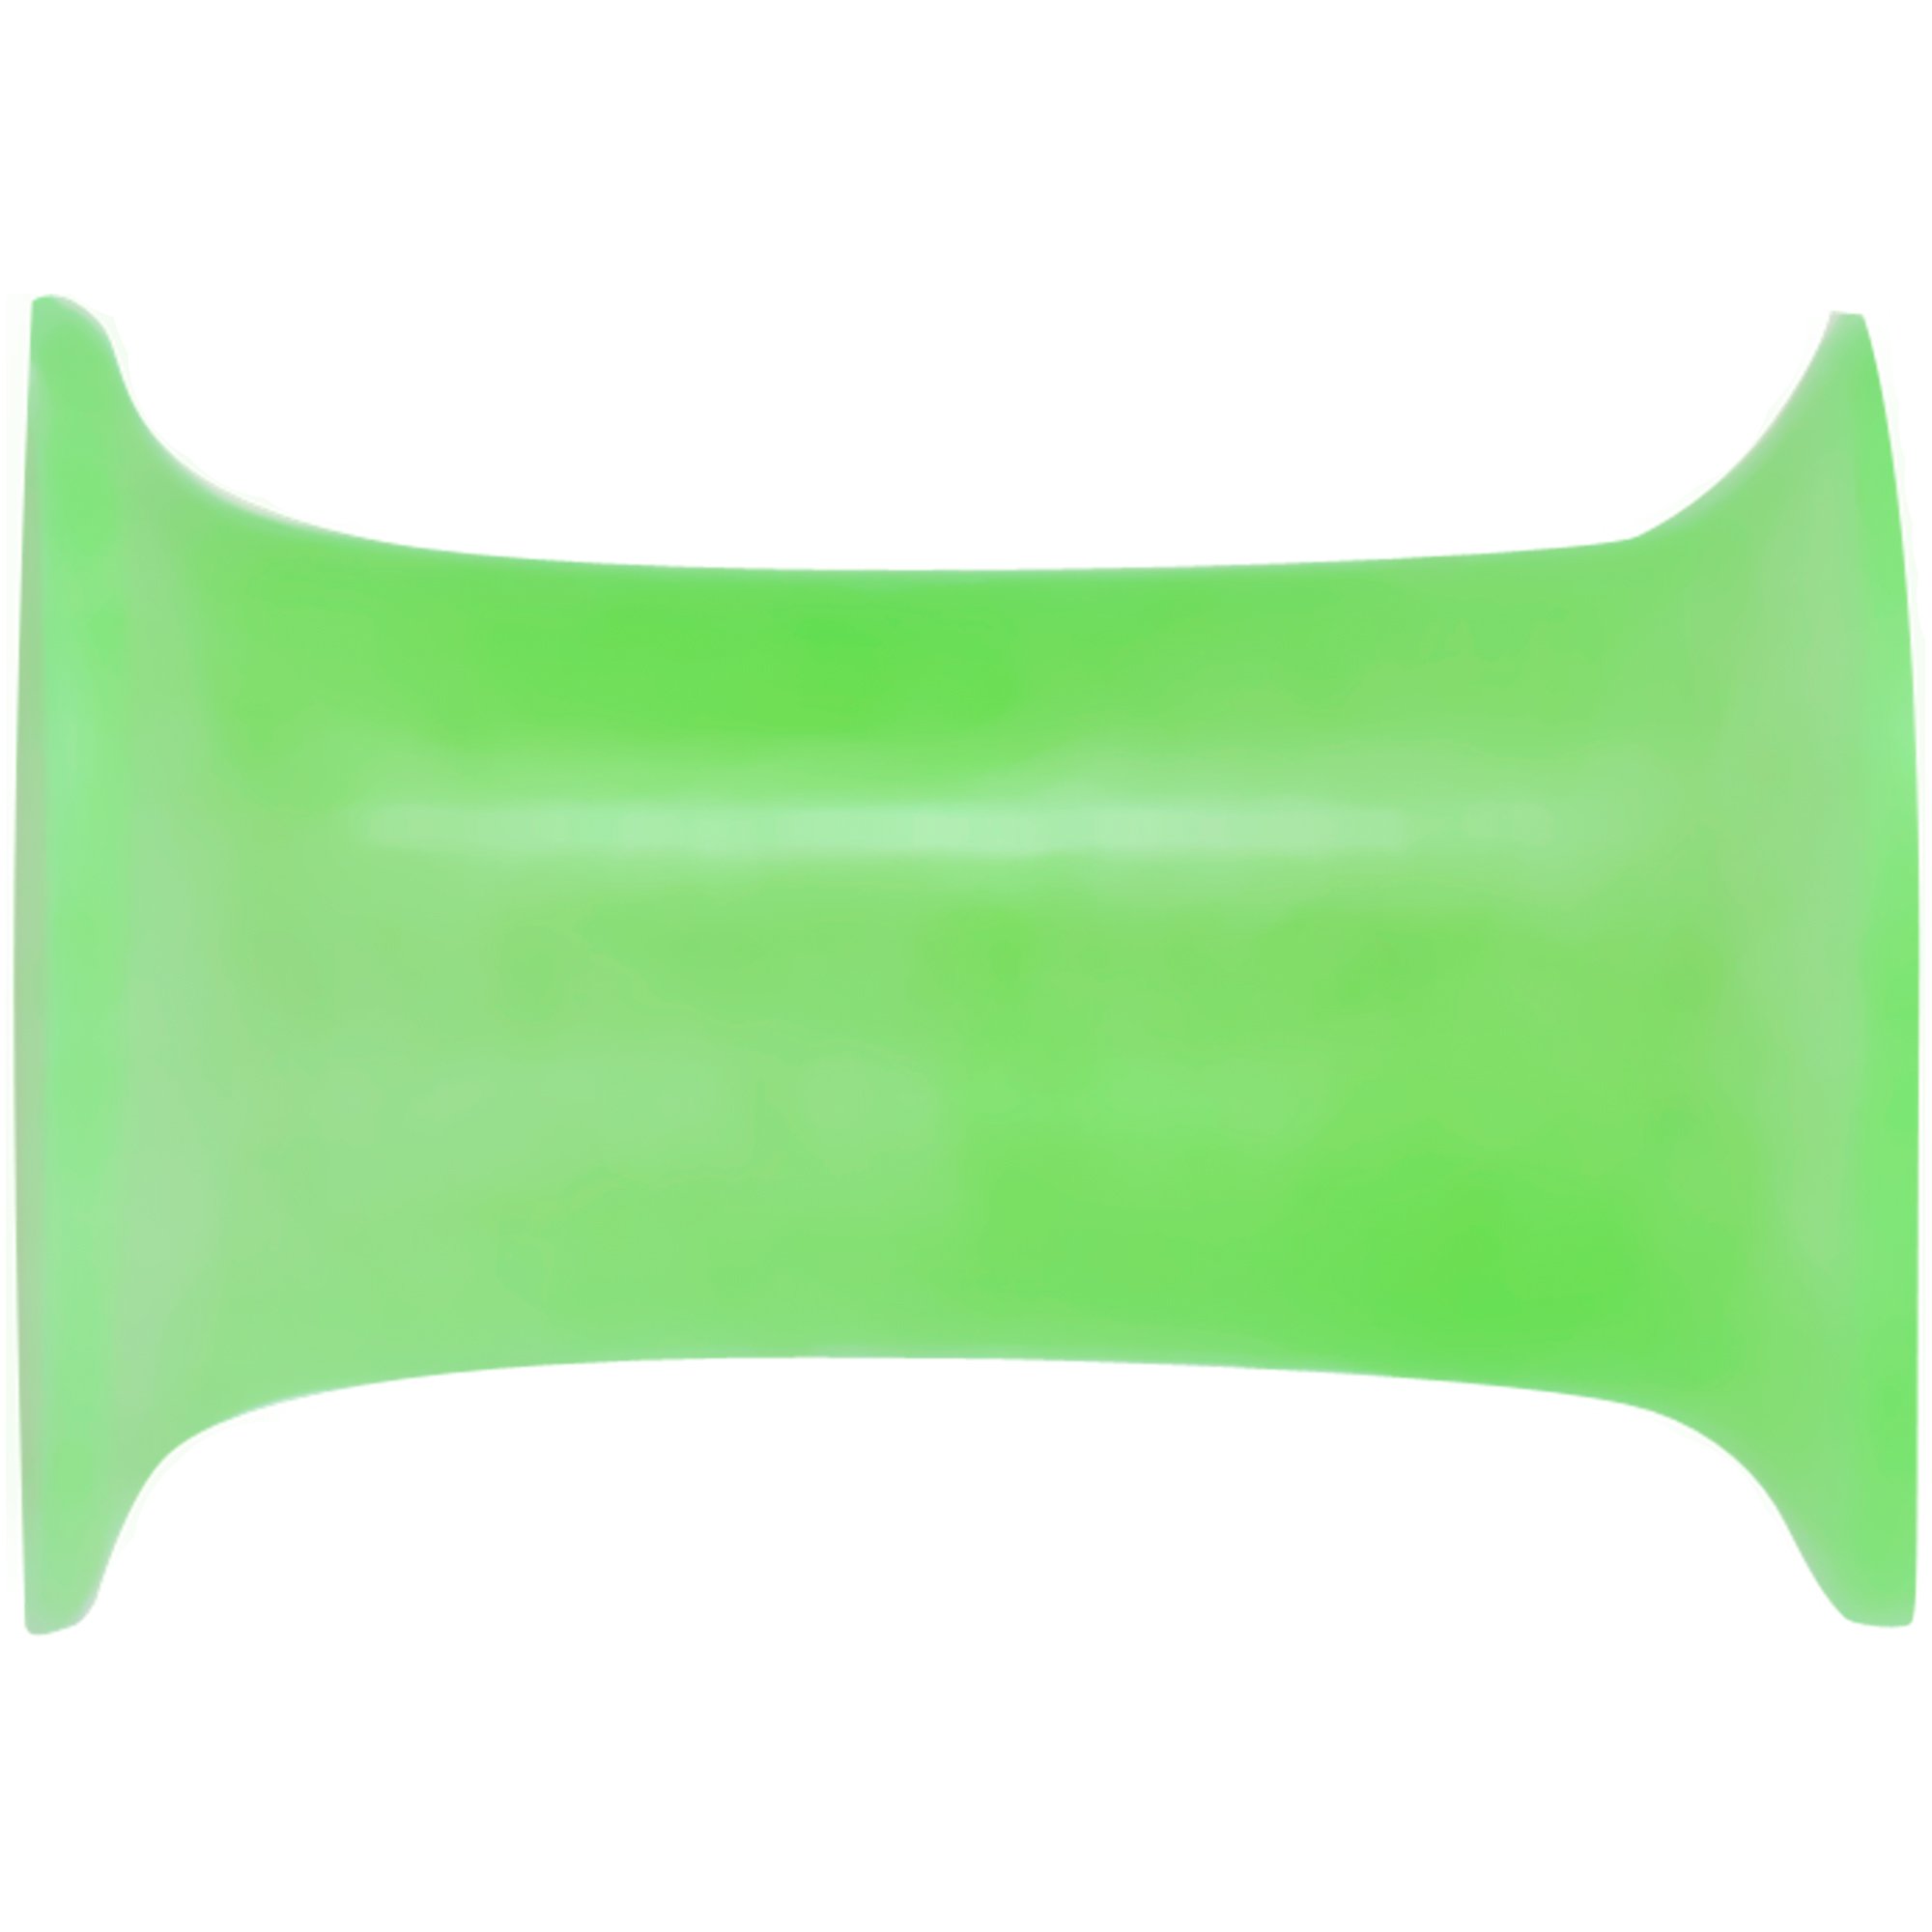 4 Gauge Thin Flexible Green Silicone Double Flare Tunnel Plug Set